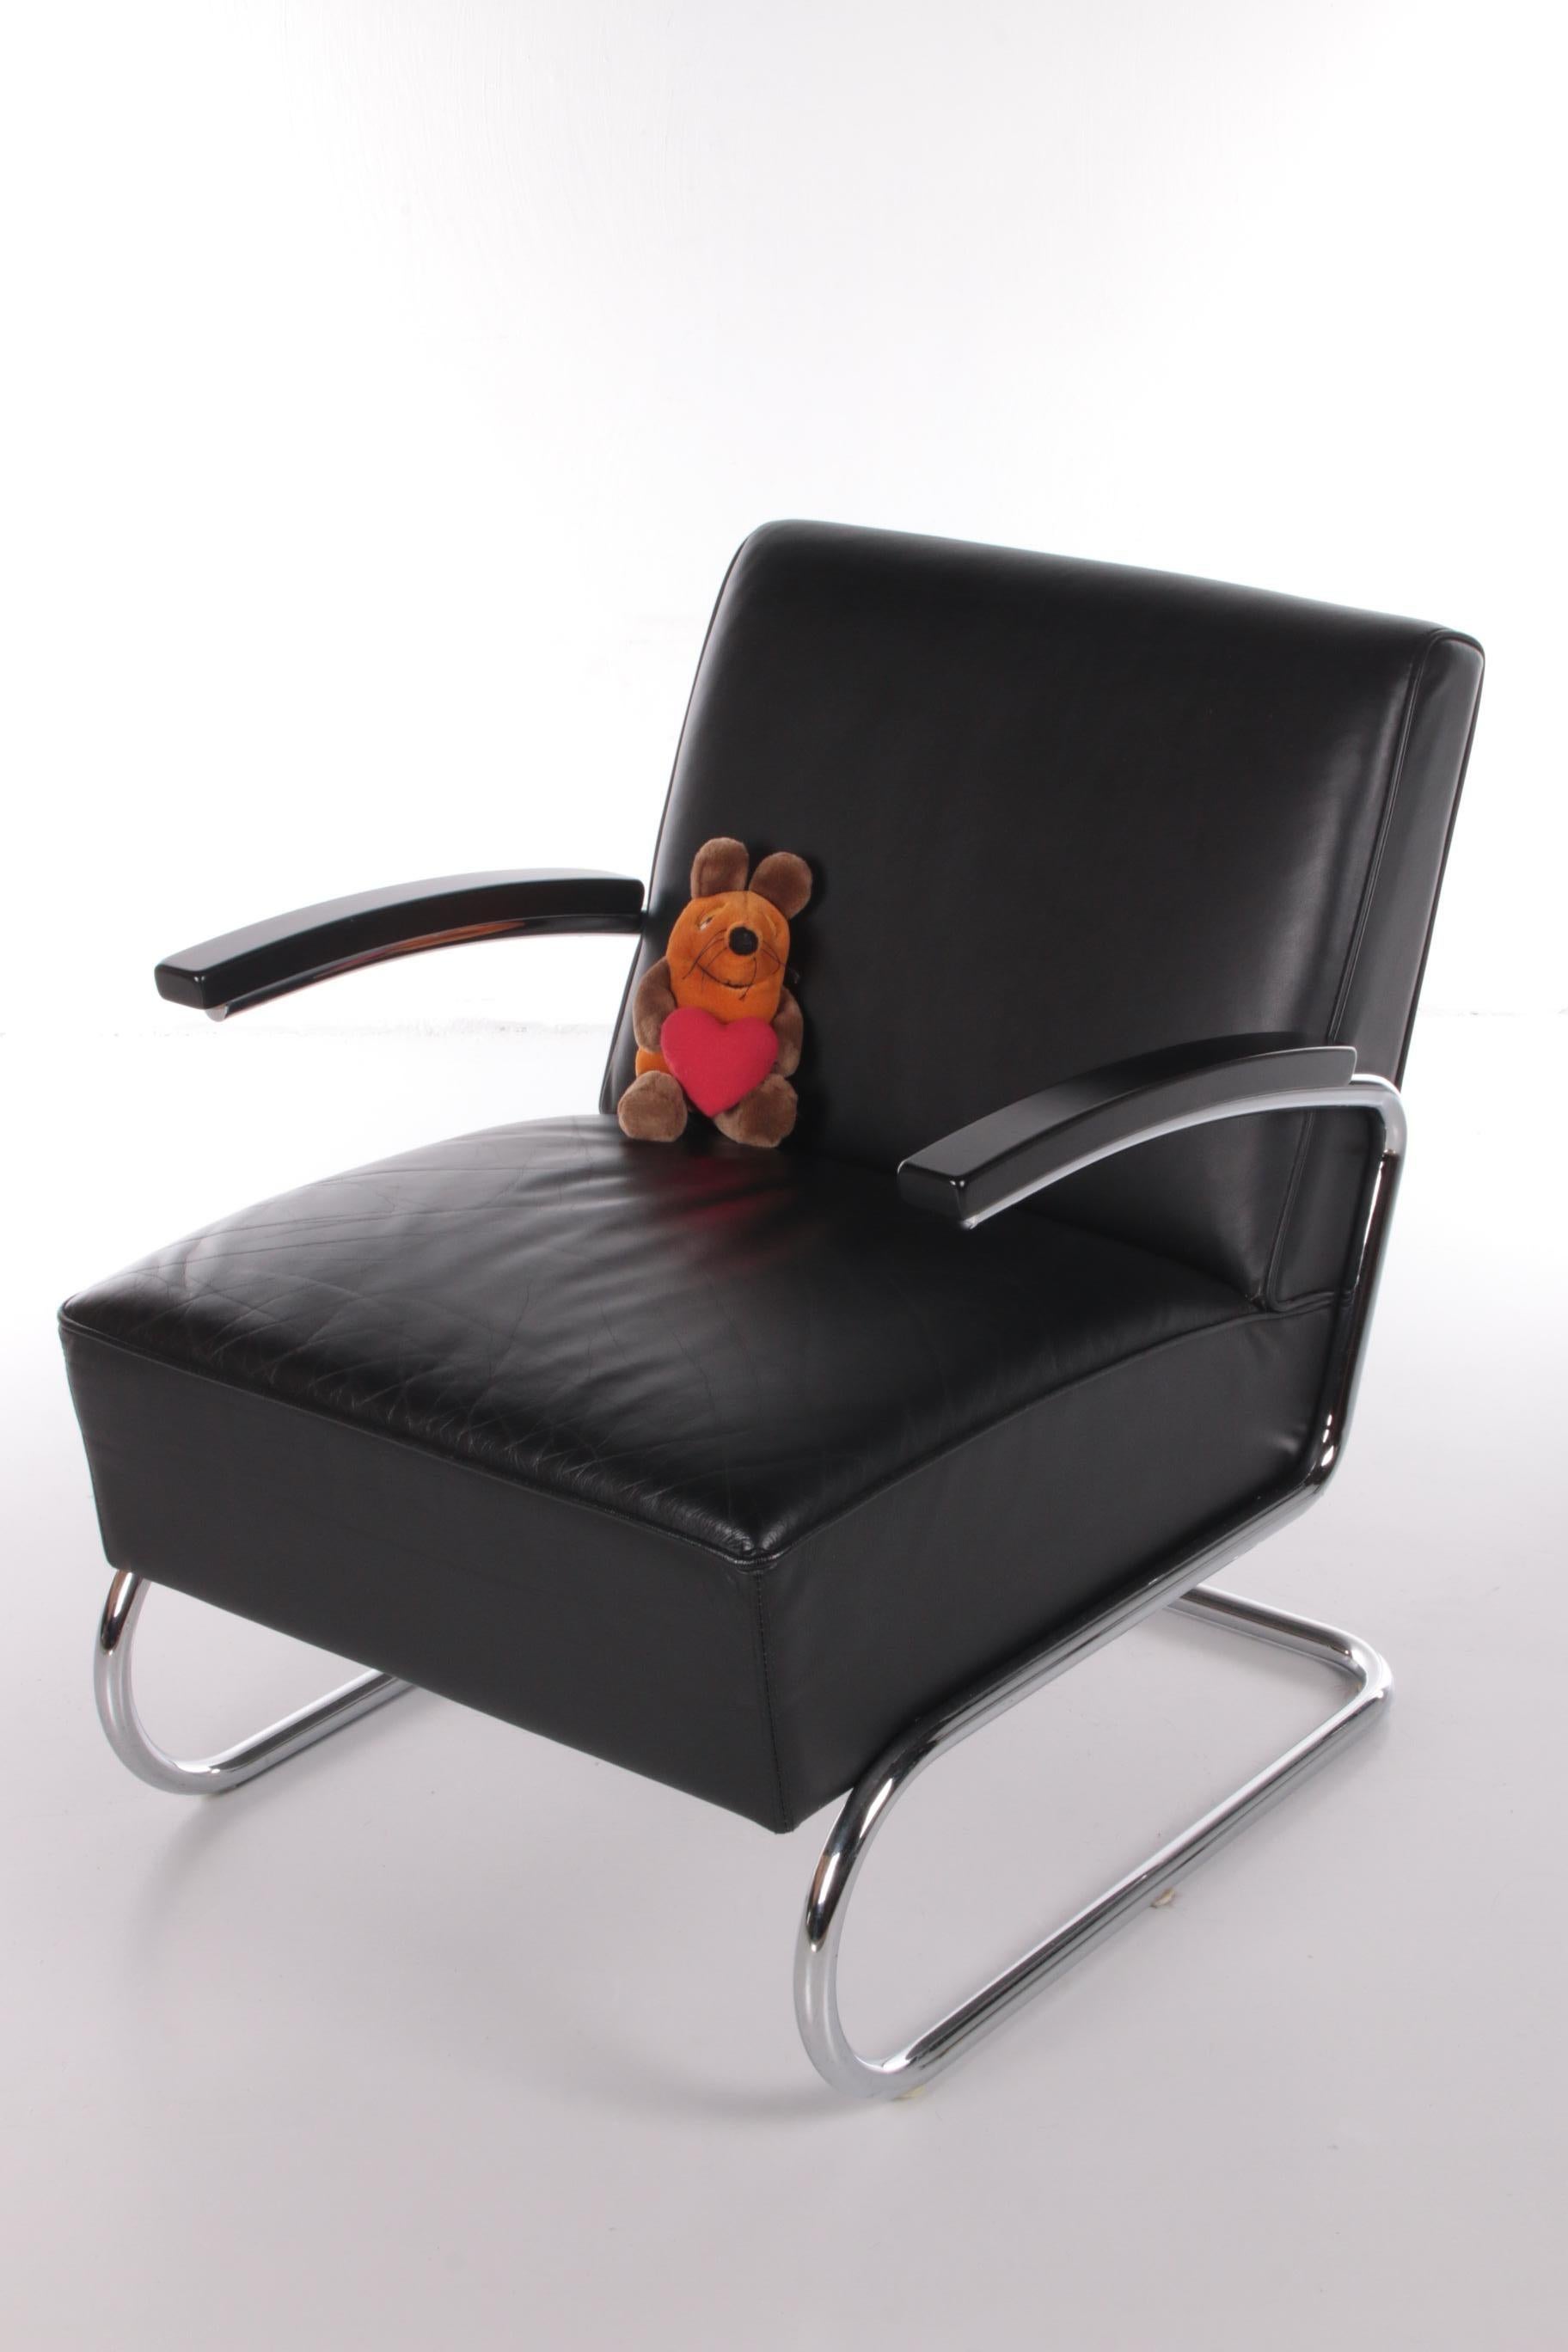 Thonet Armchair Model S411 black leather, 1980s


The Thonet S411 Armchair was designed by the Thonet Design Team.

This chair is a Thonet produced chair from about 2010. The chair is in very good condition and can last for a very long time.